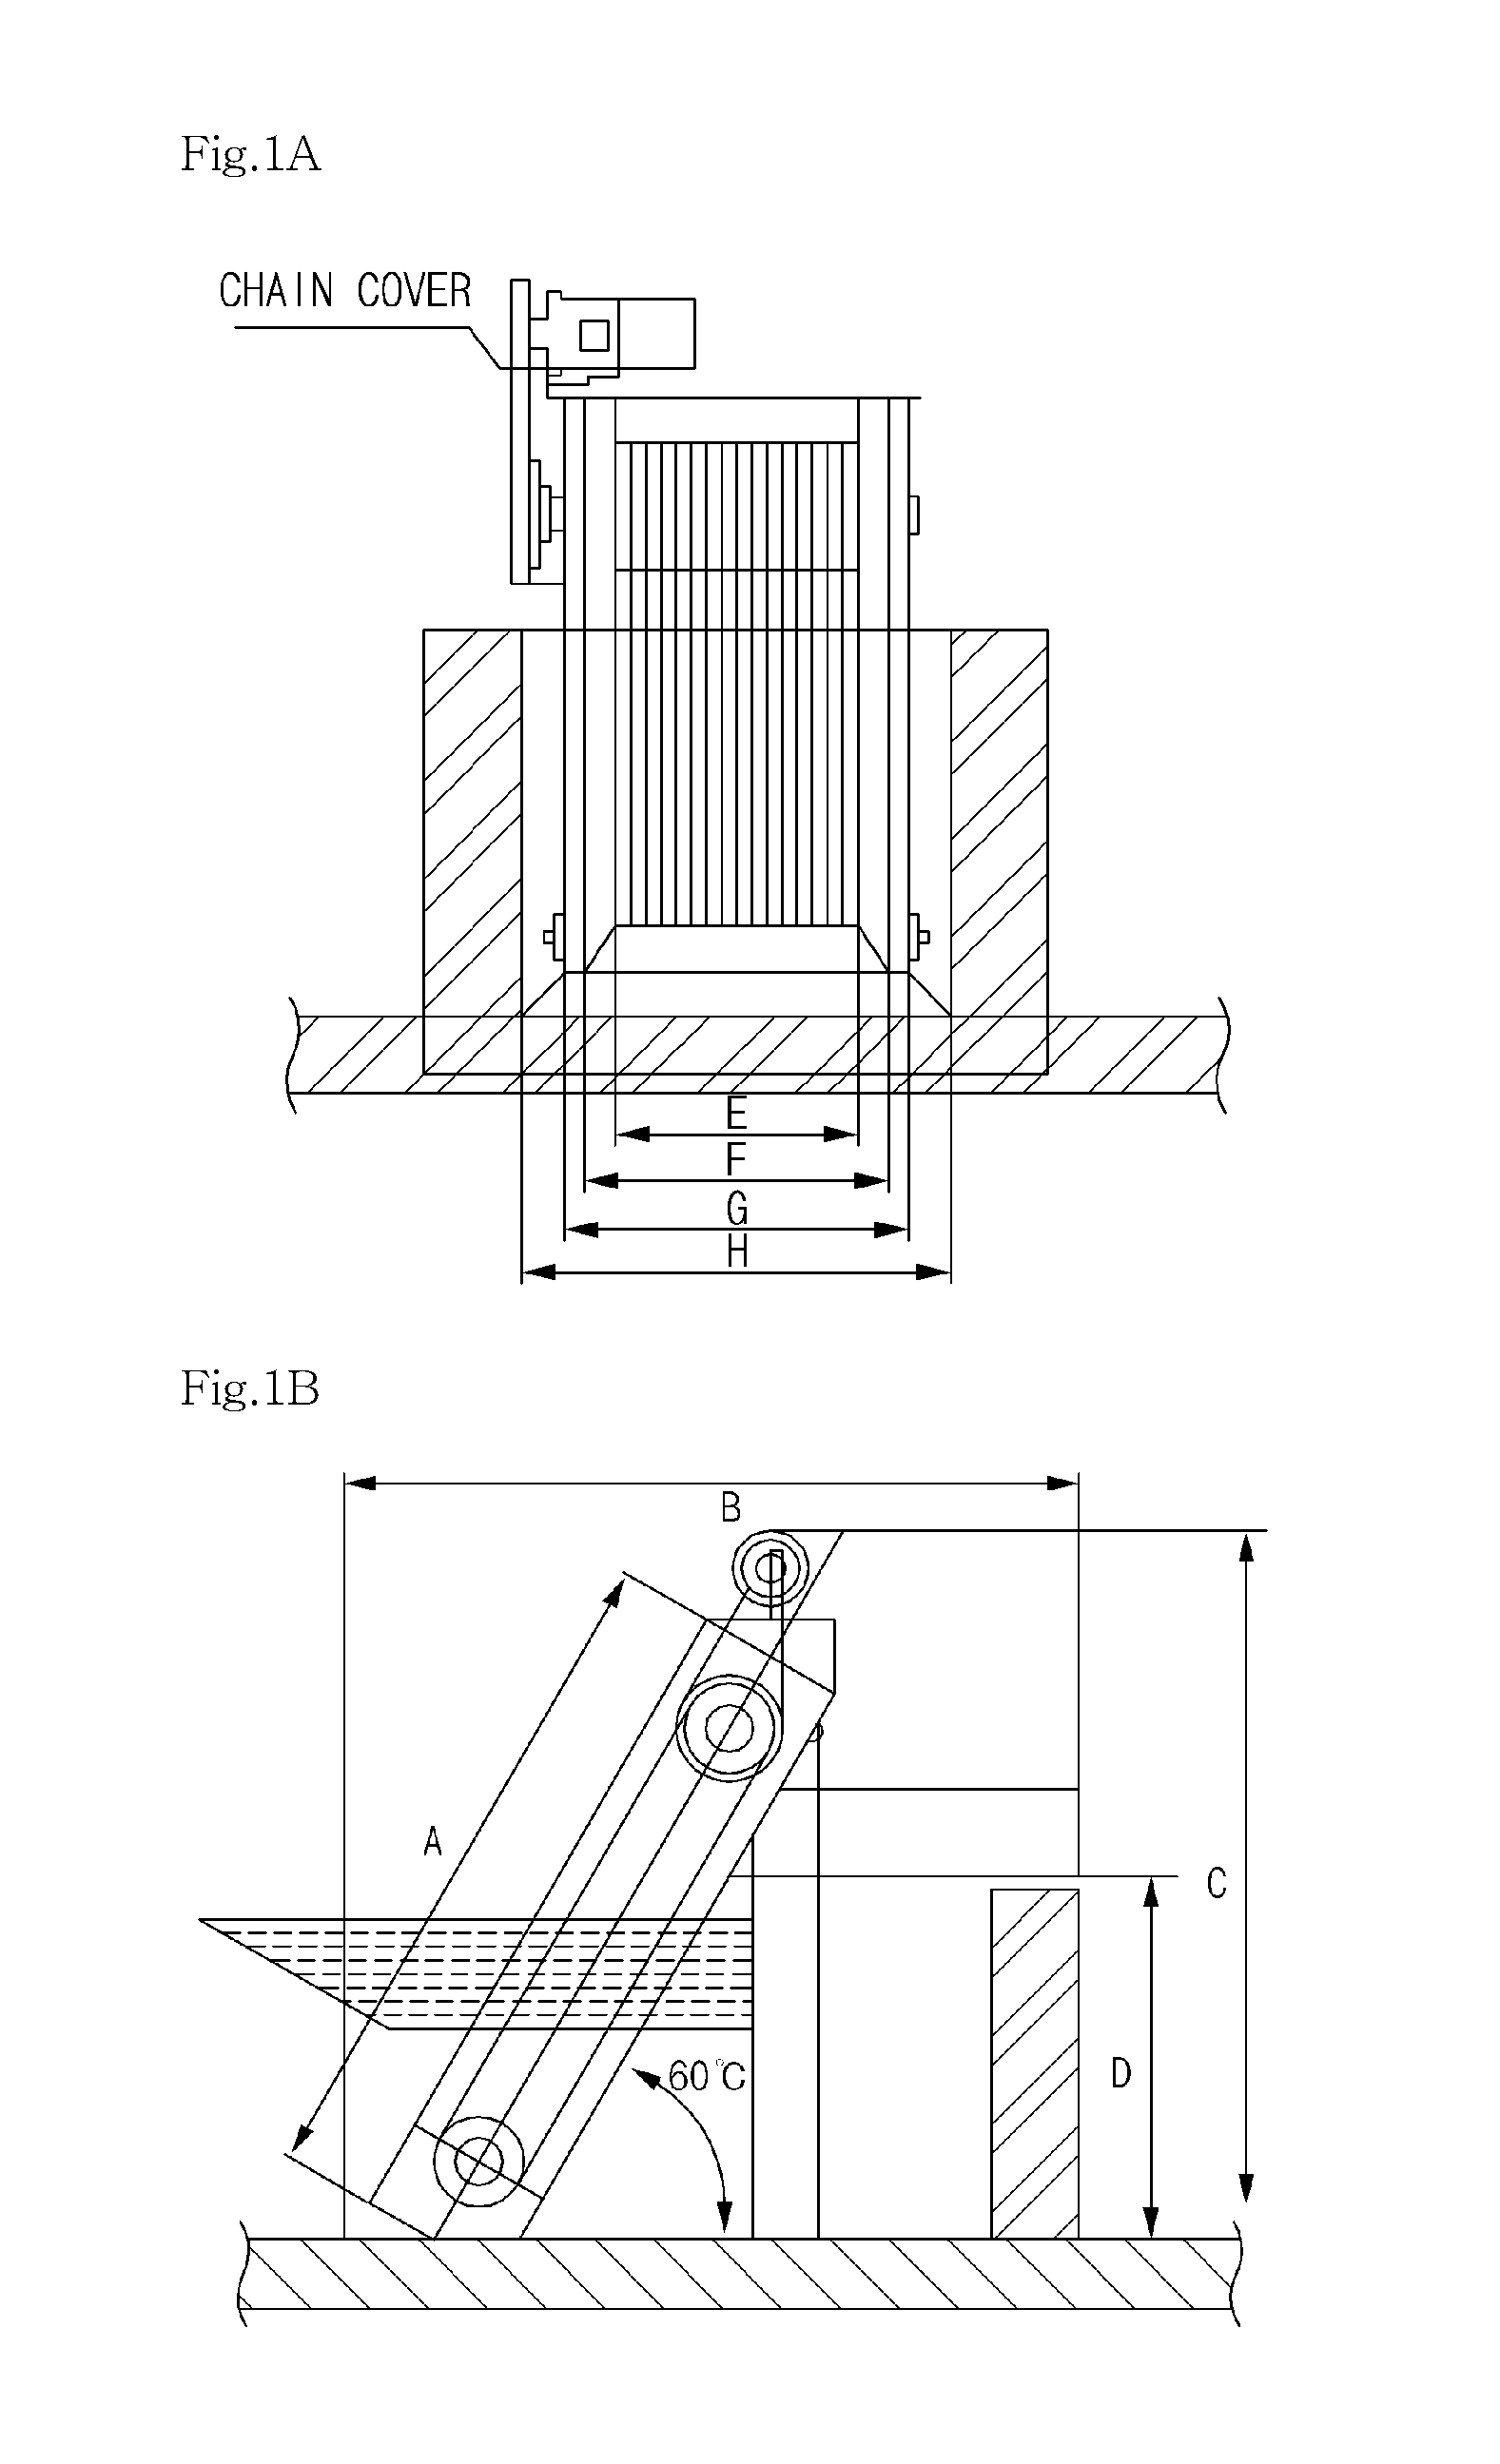 Apparatus for filtering sewage and wastewater